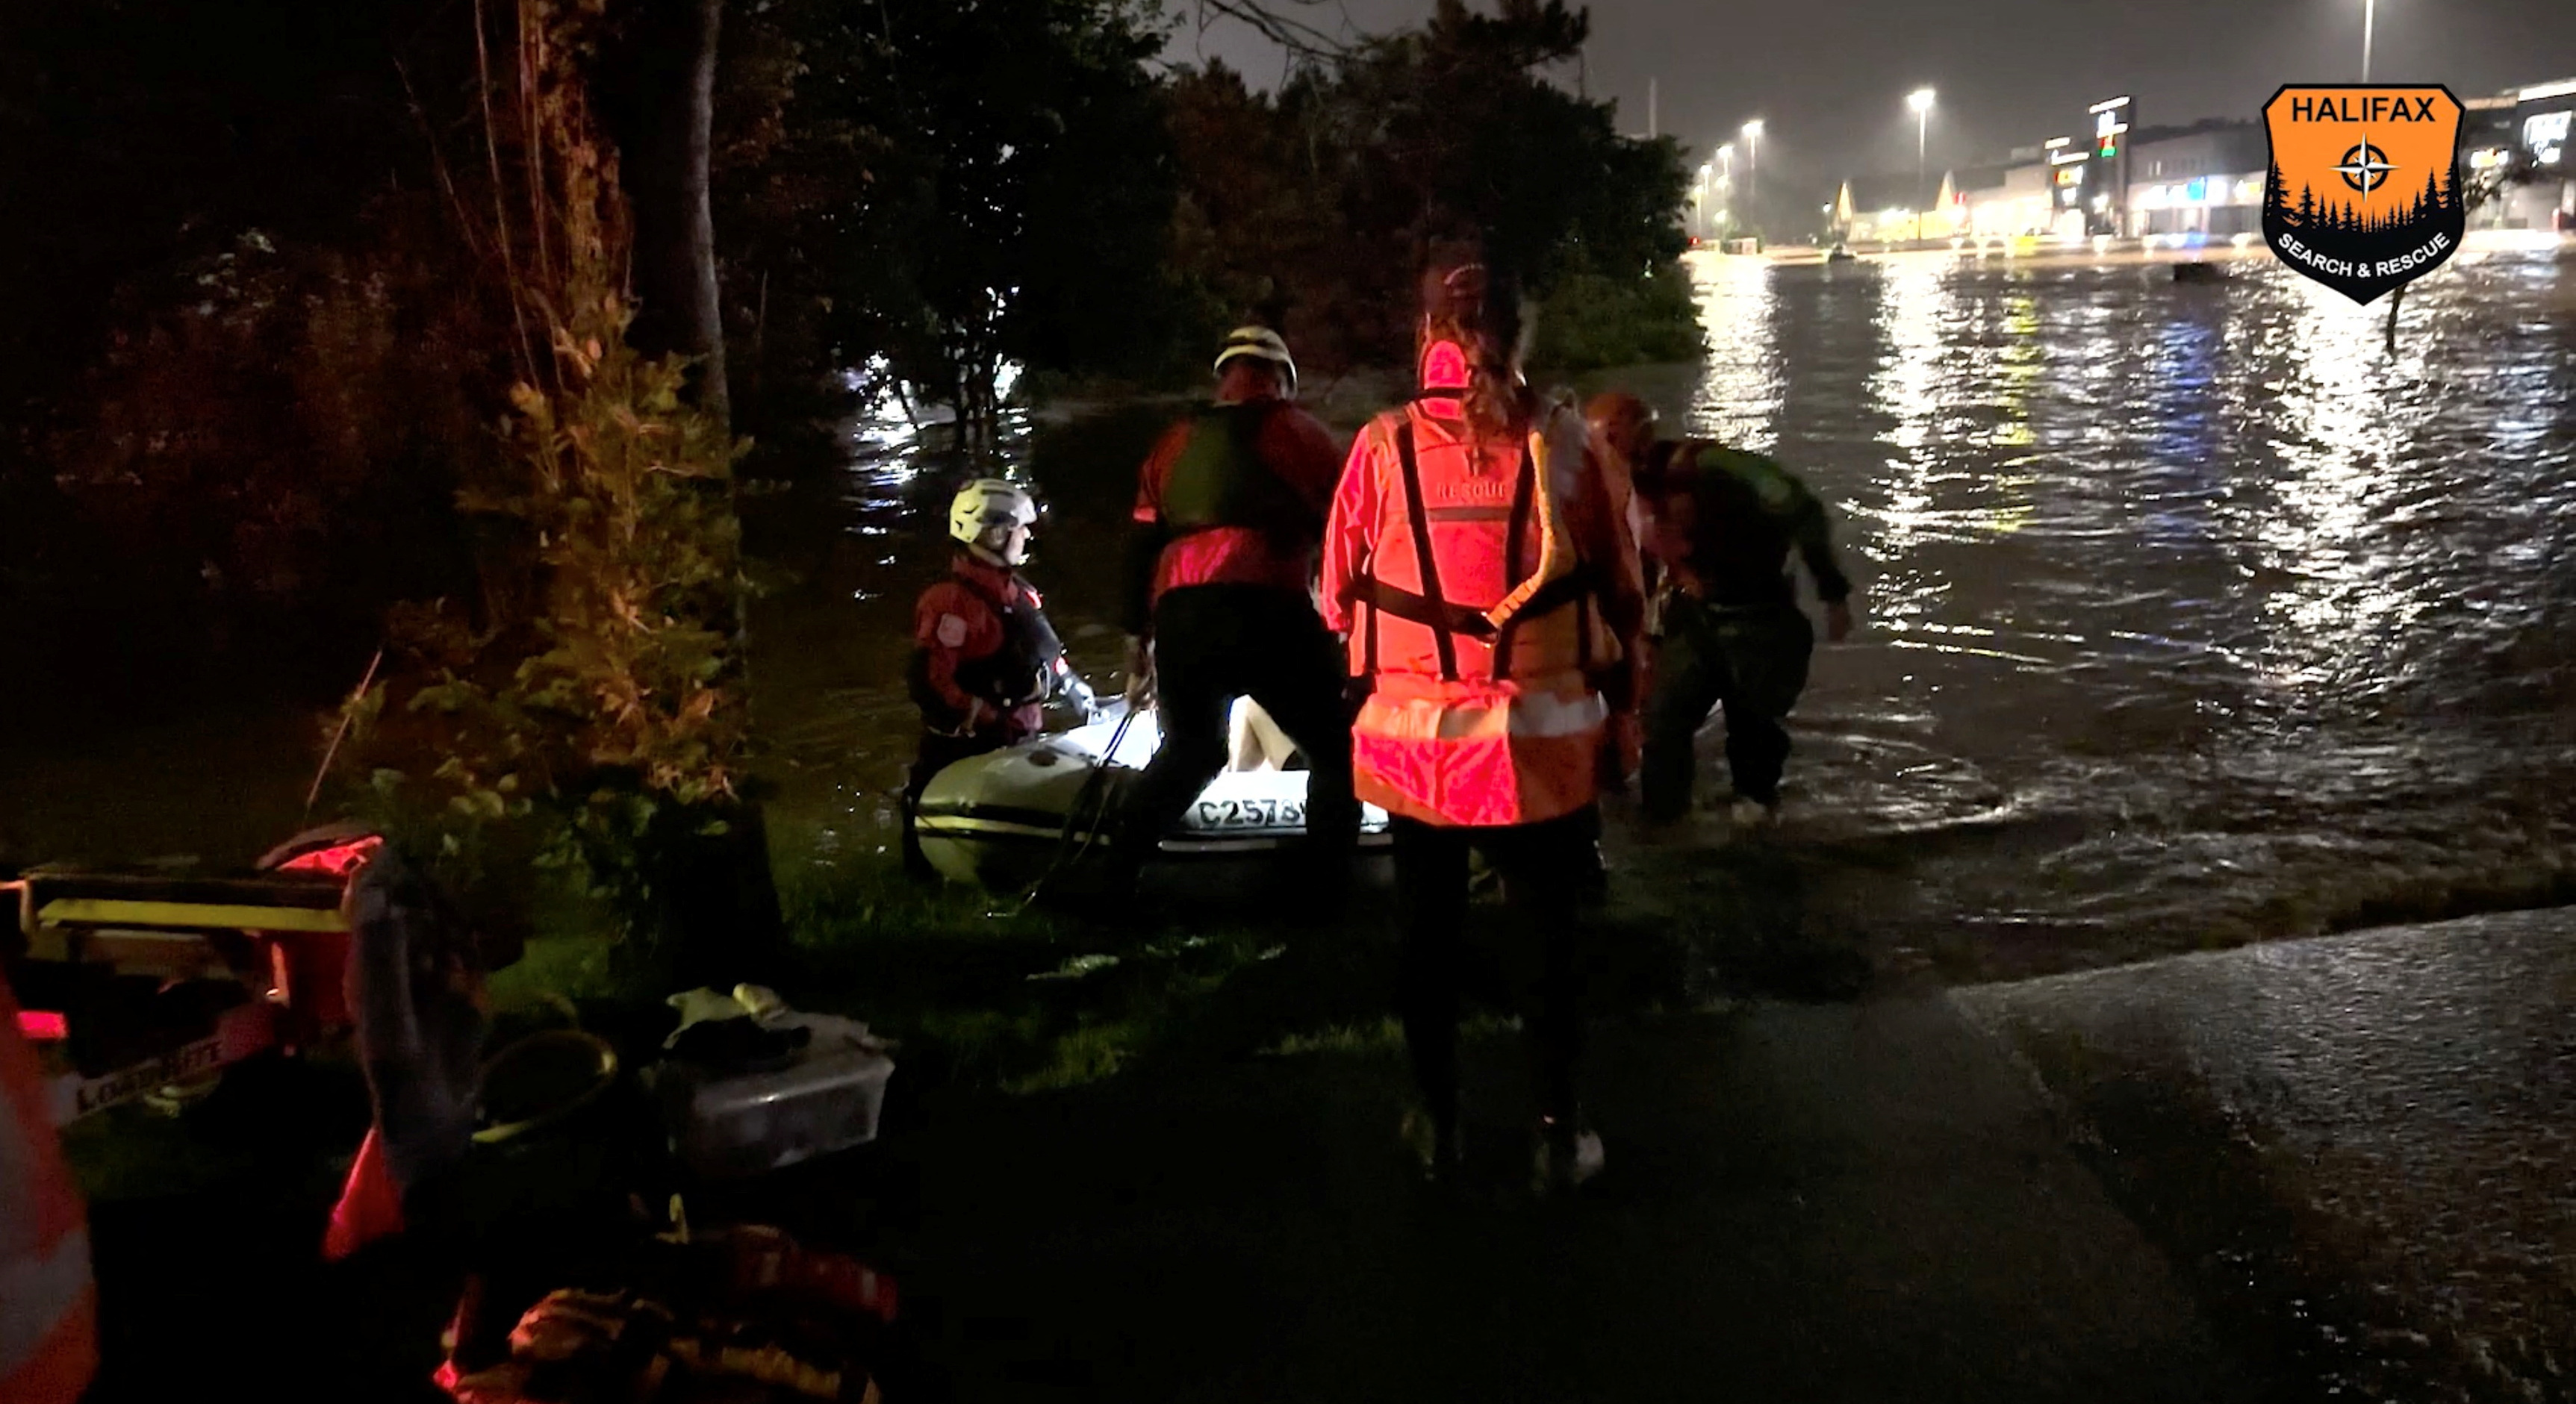 Rescue personnel operates in Bedford